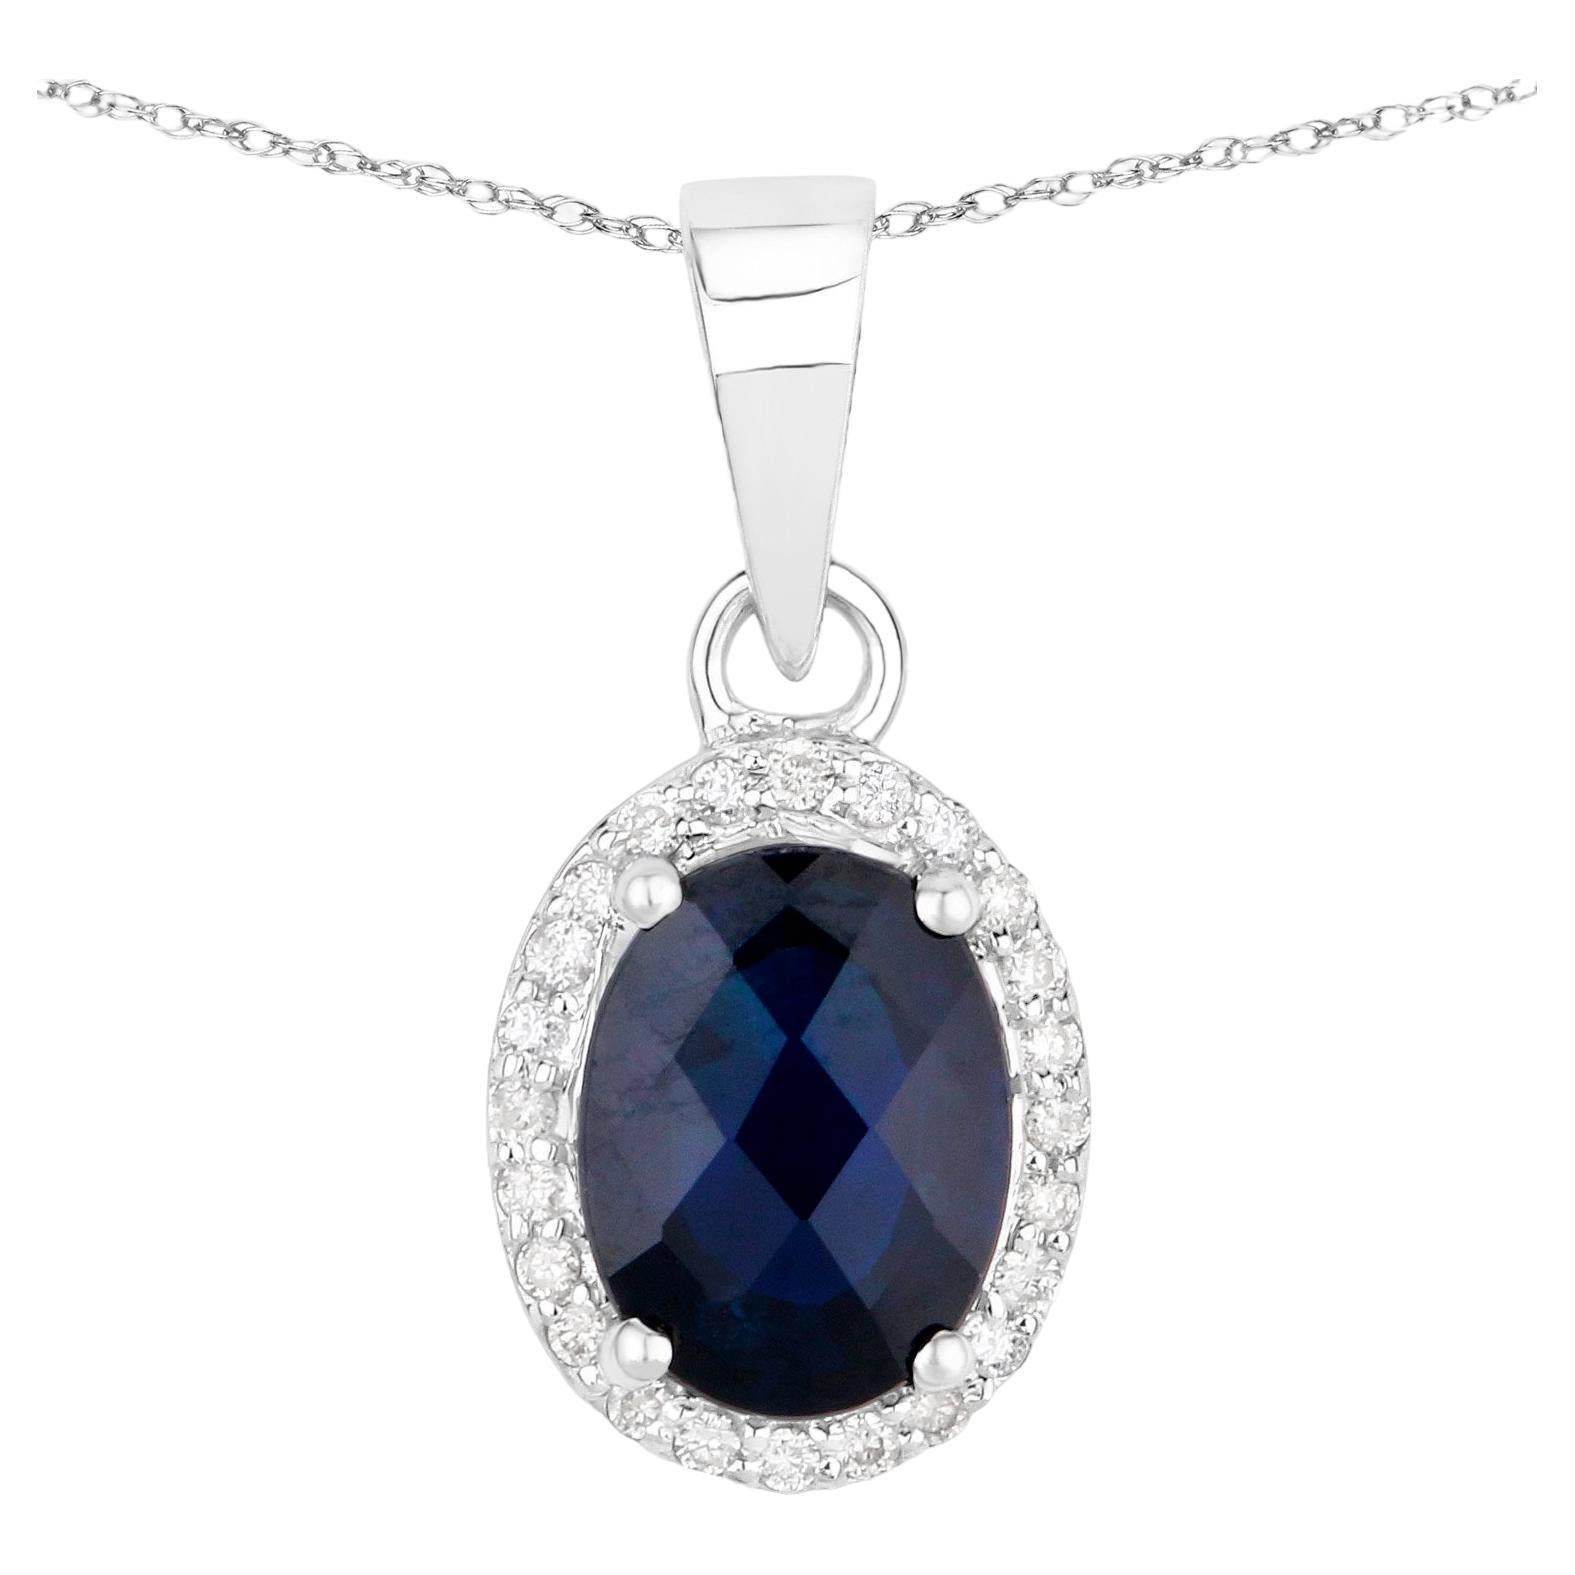 Blue Sapphire Necklace With Diamond Halo 1.66 Carats 14K White Gold